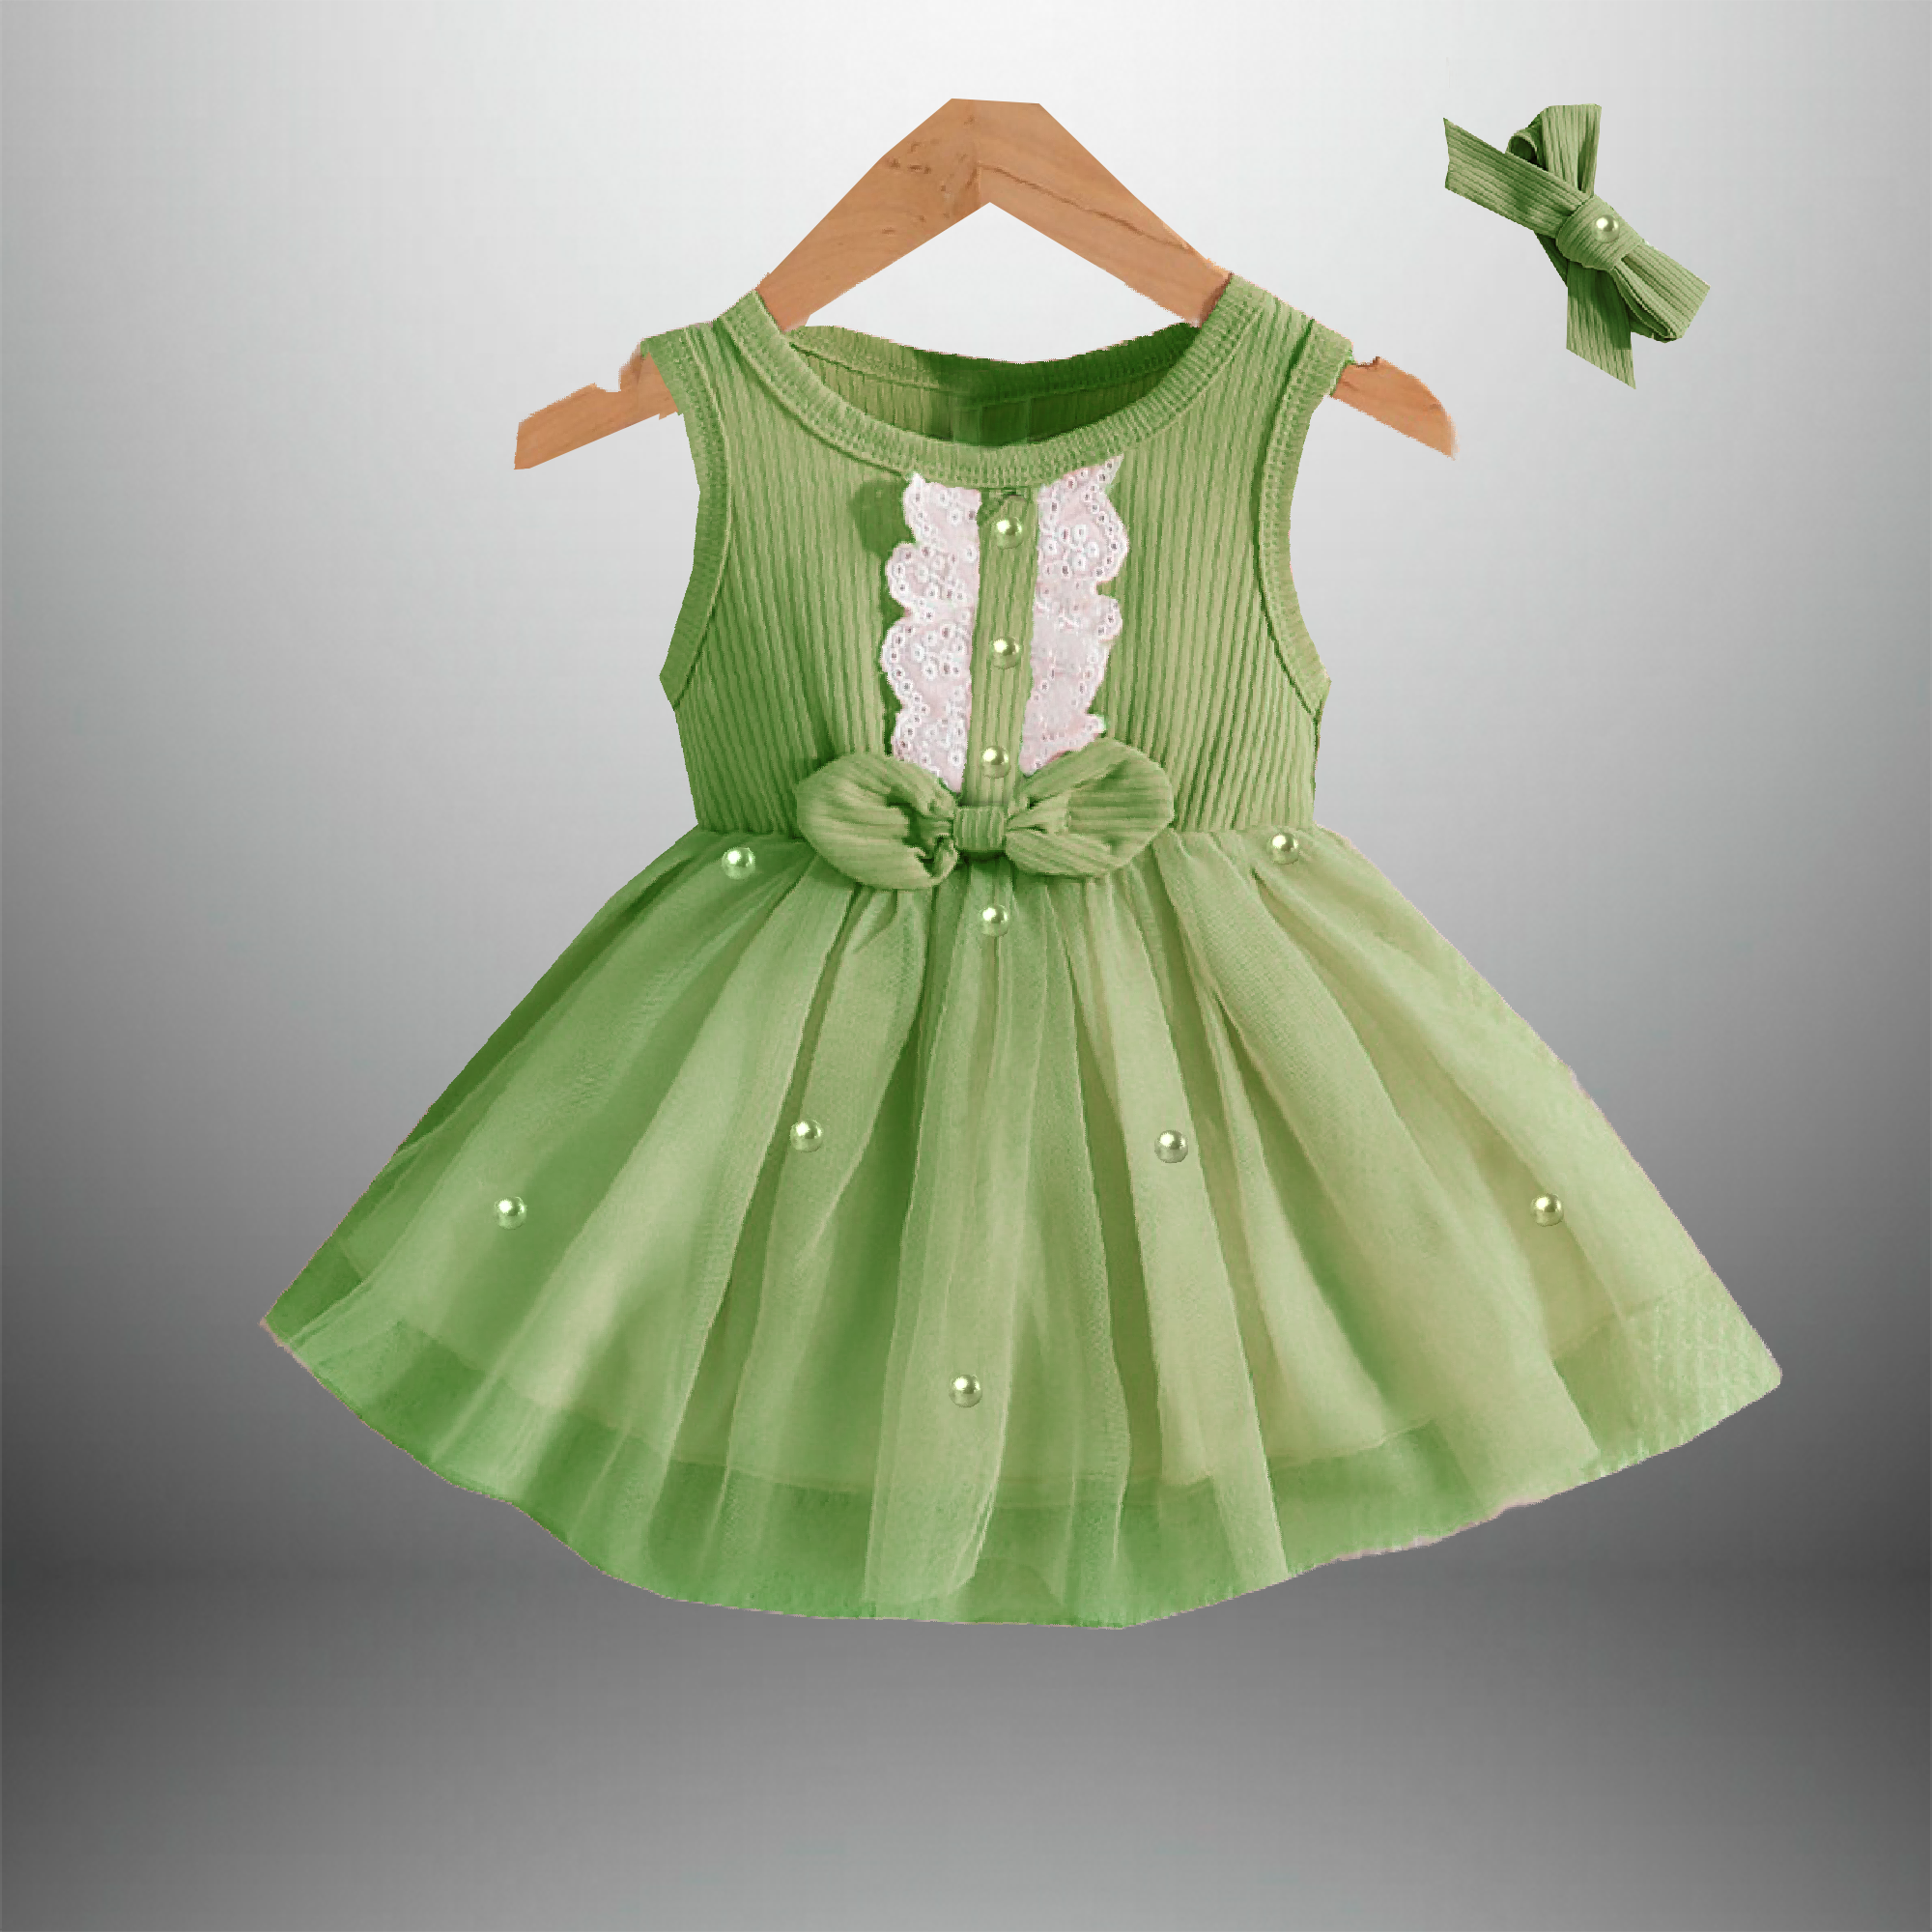 Girl's flared frock with laces and pearls embellishment -RKFCW416